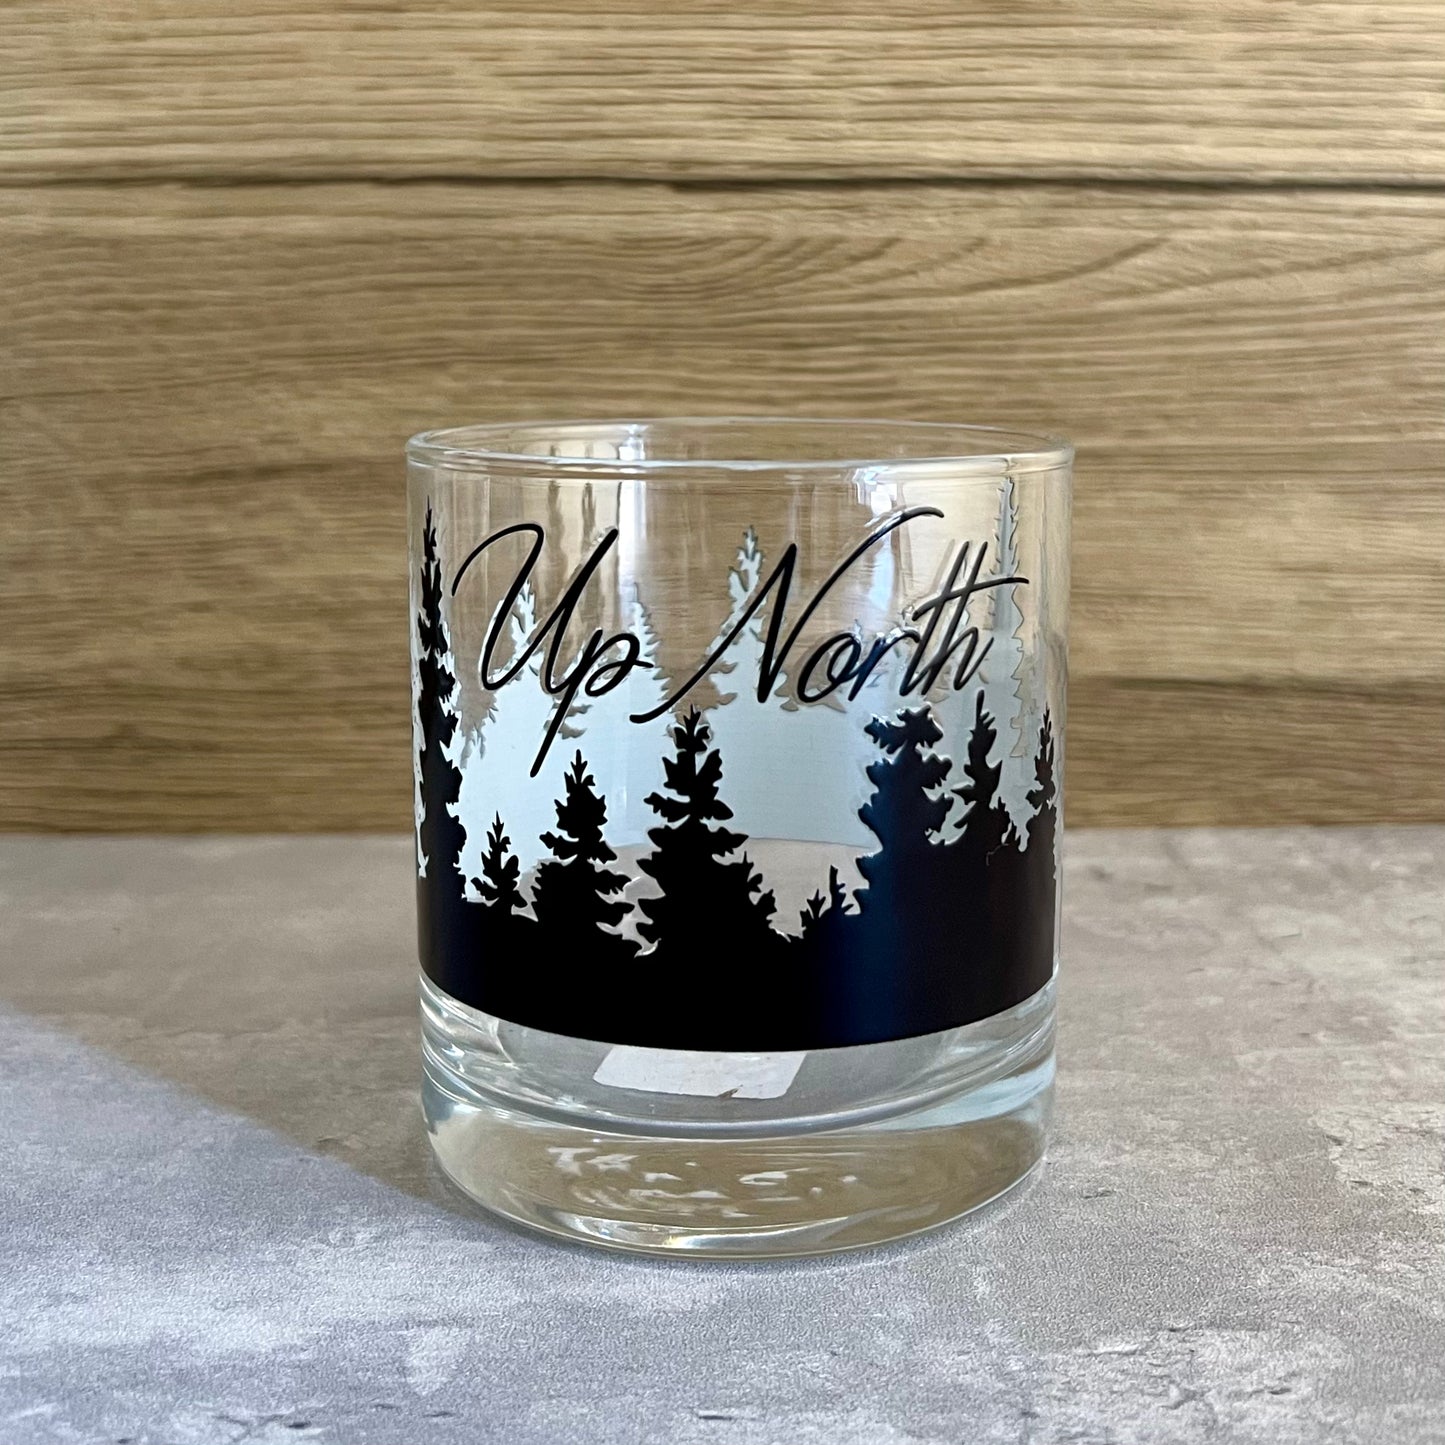 Up North Whiskey Glass